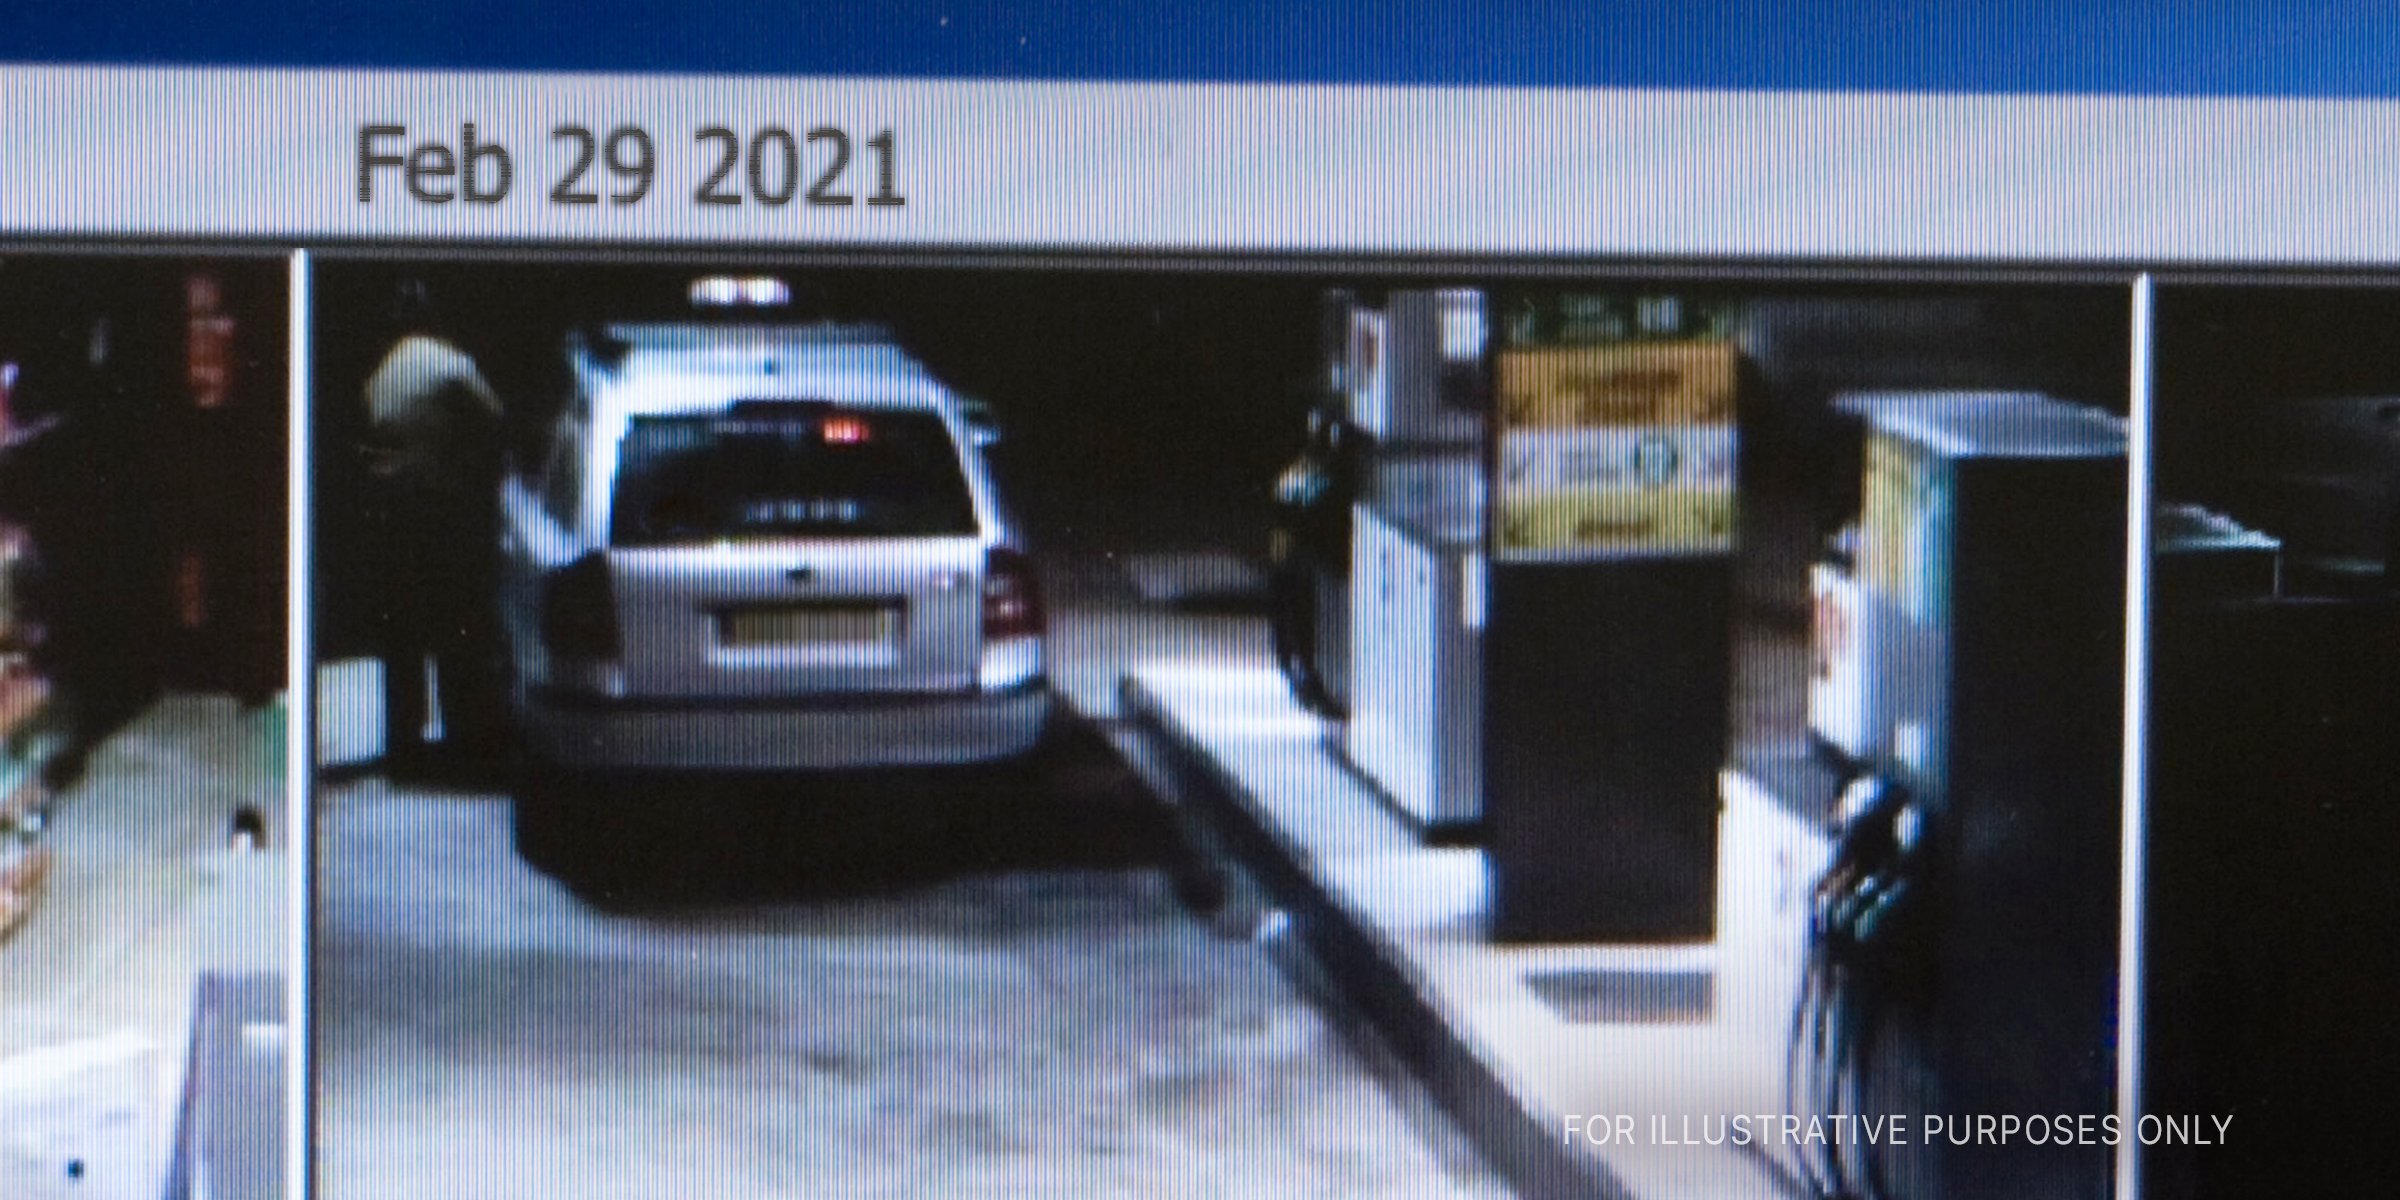 Getty Images | Surveillance Camera Footage Showing A Car At A Gas Station